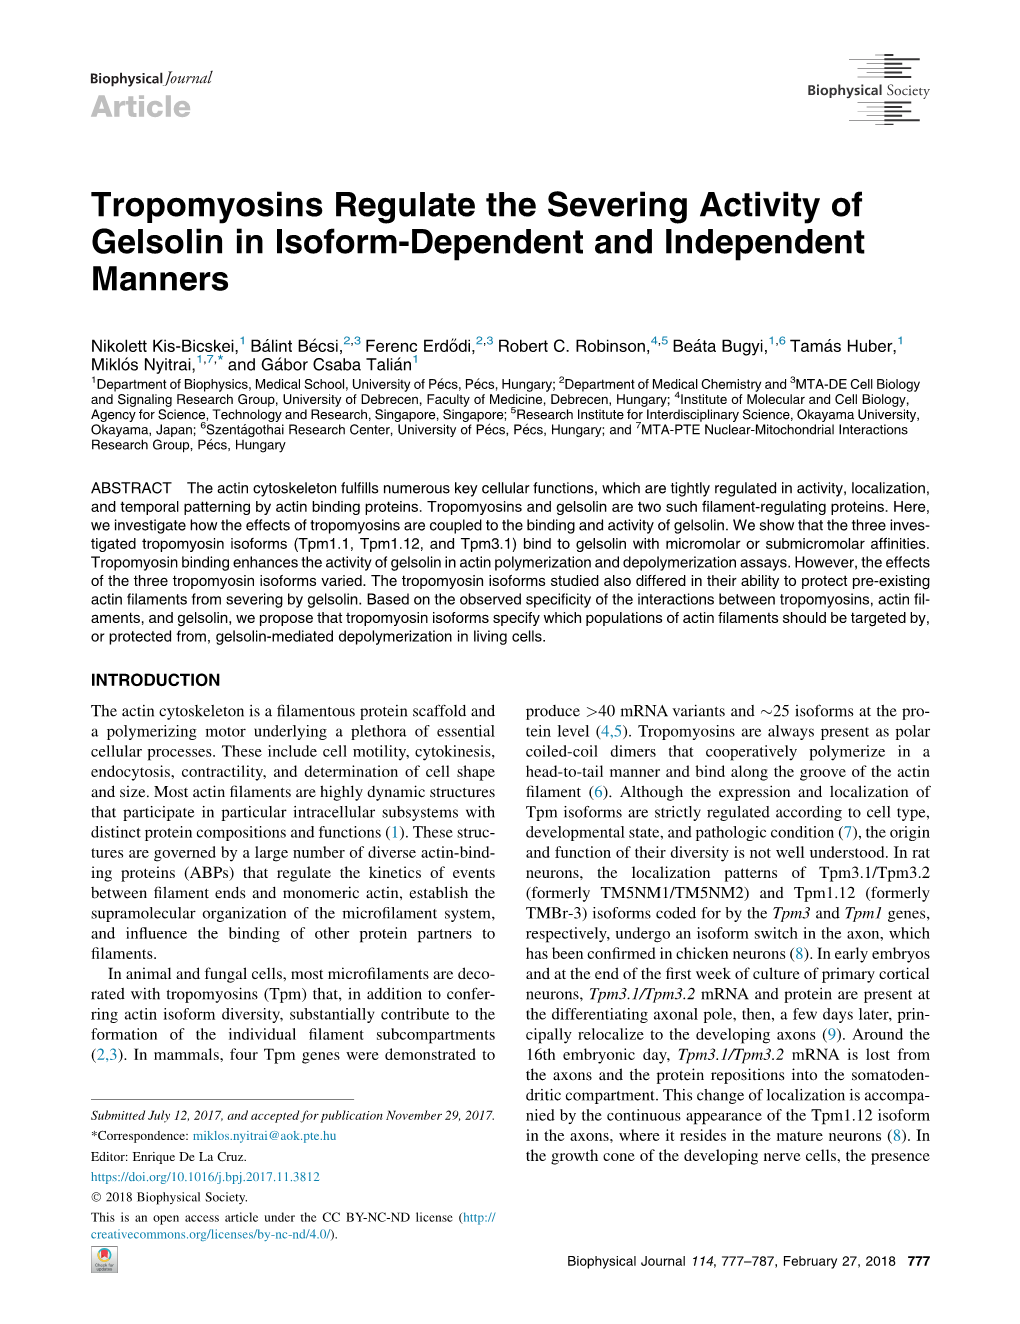 Tropomyosins Regulate the Severing Activity of Gelsolin in Isoform-Dependent and Independent Manners